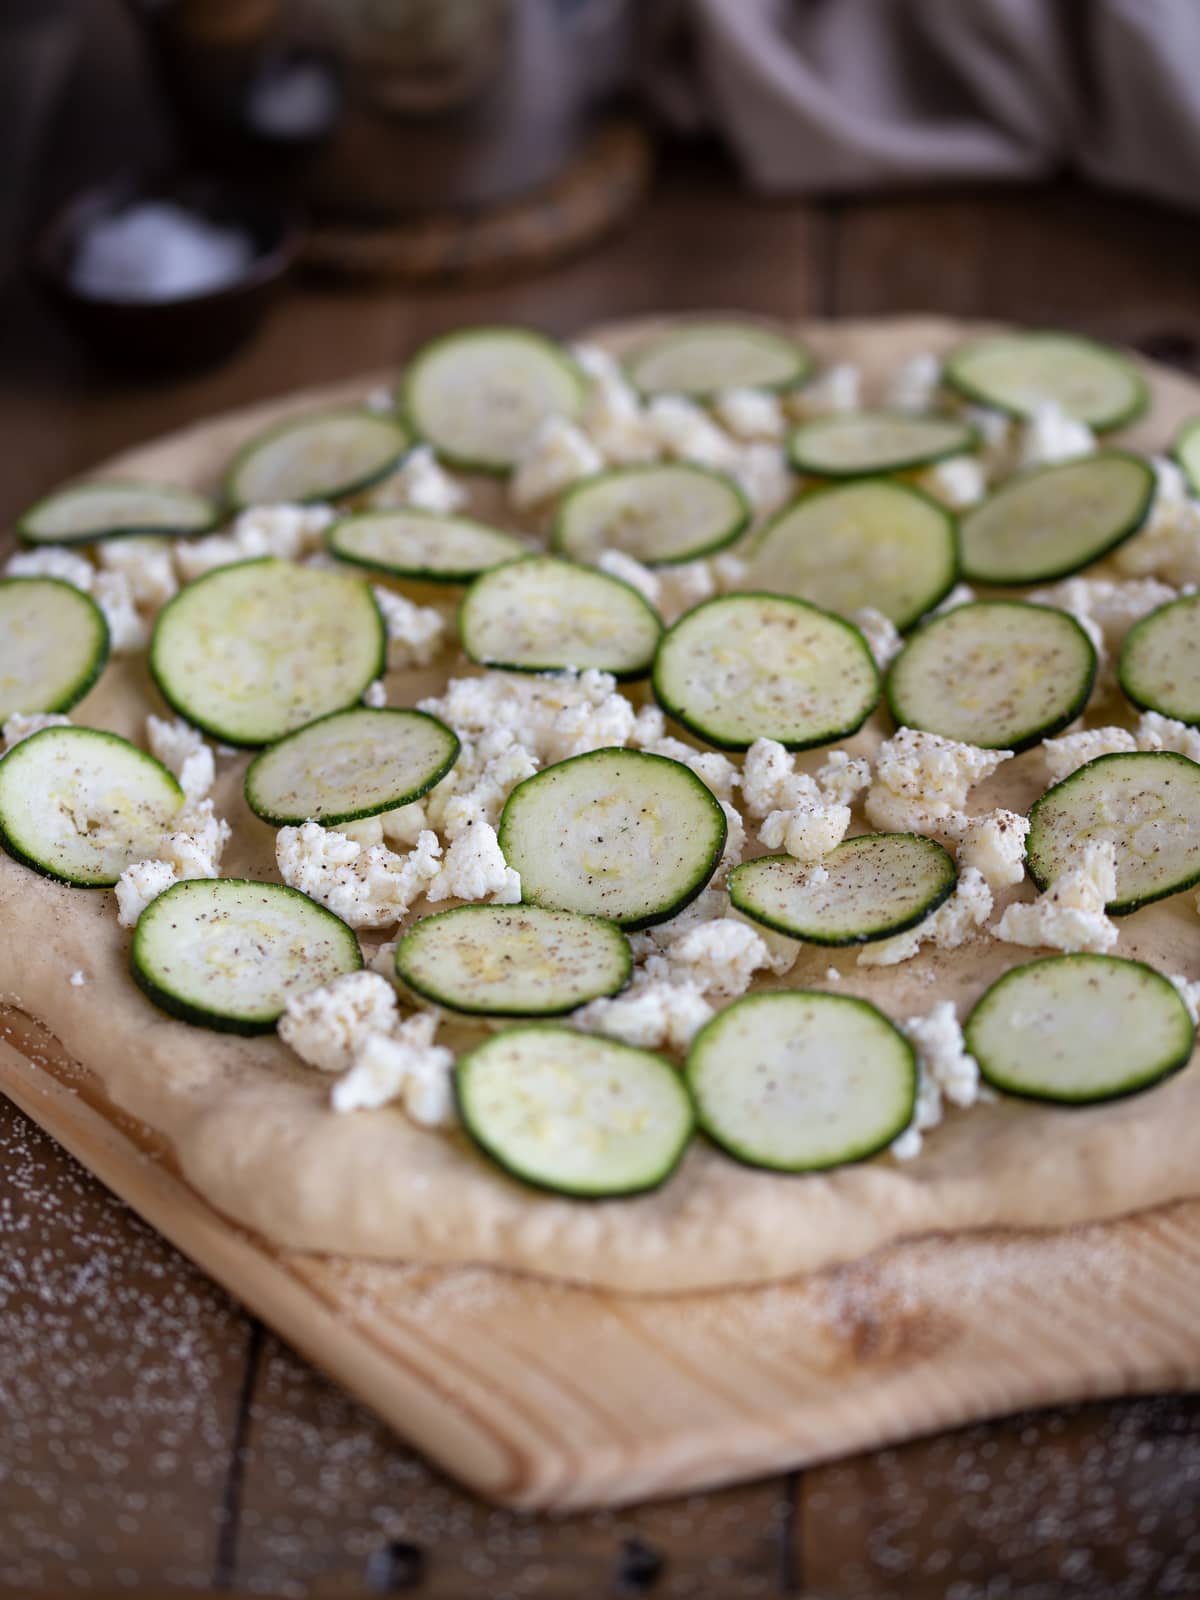 Unbaked pizza bianca topped with fresh zucchini and feta.